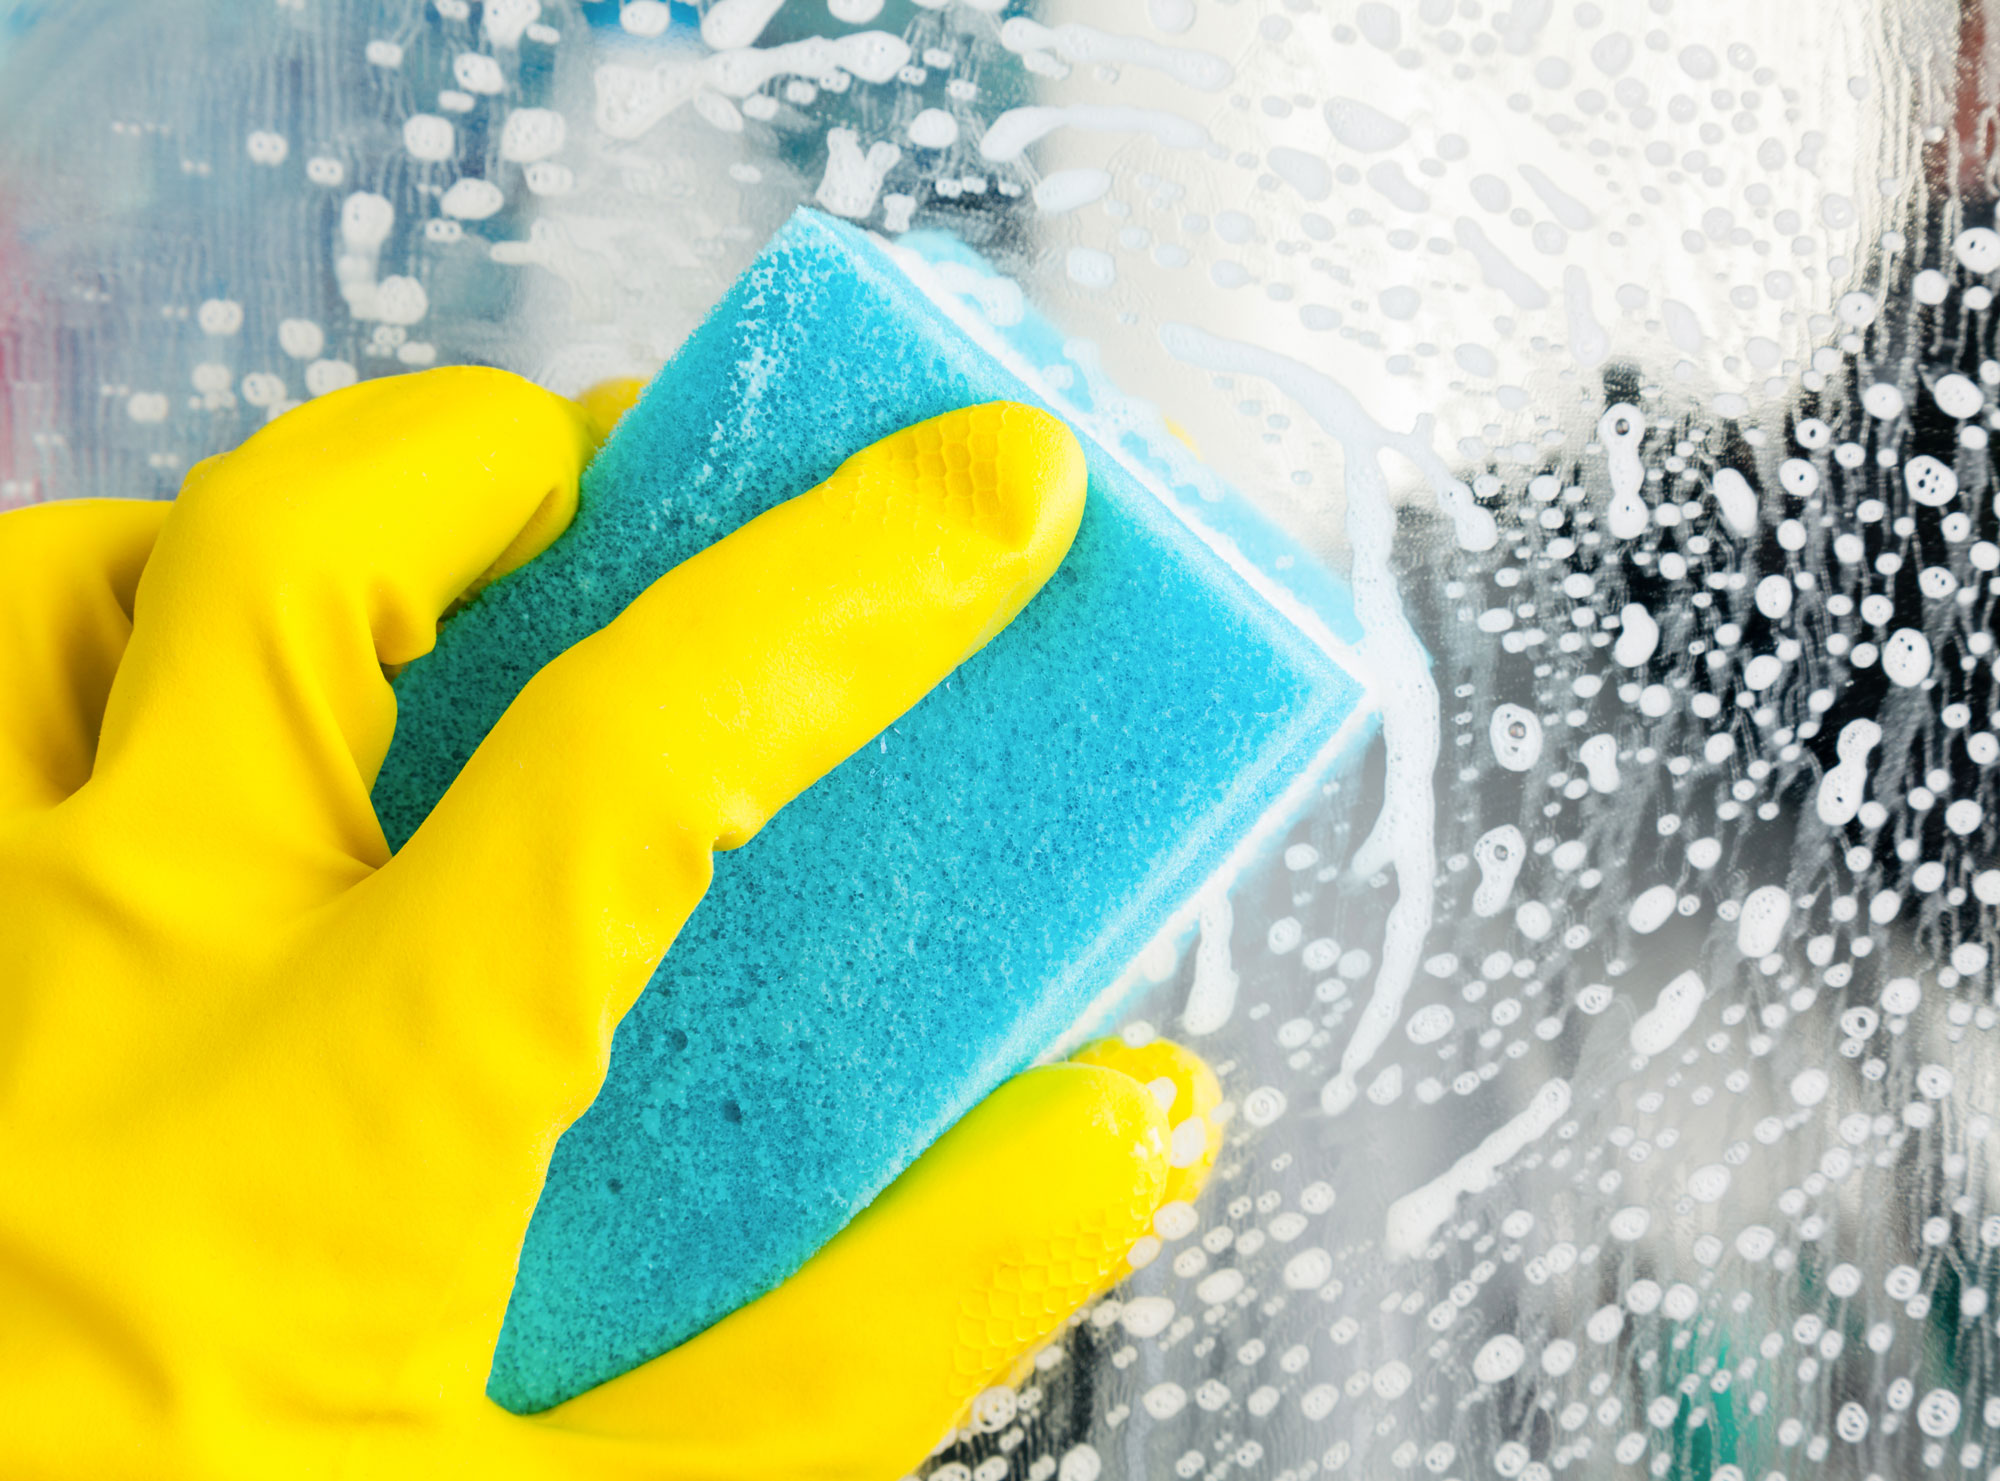 Someone is wearing a yellow glove and holding a blue sponge while scrubbing a shower door.